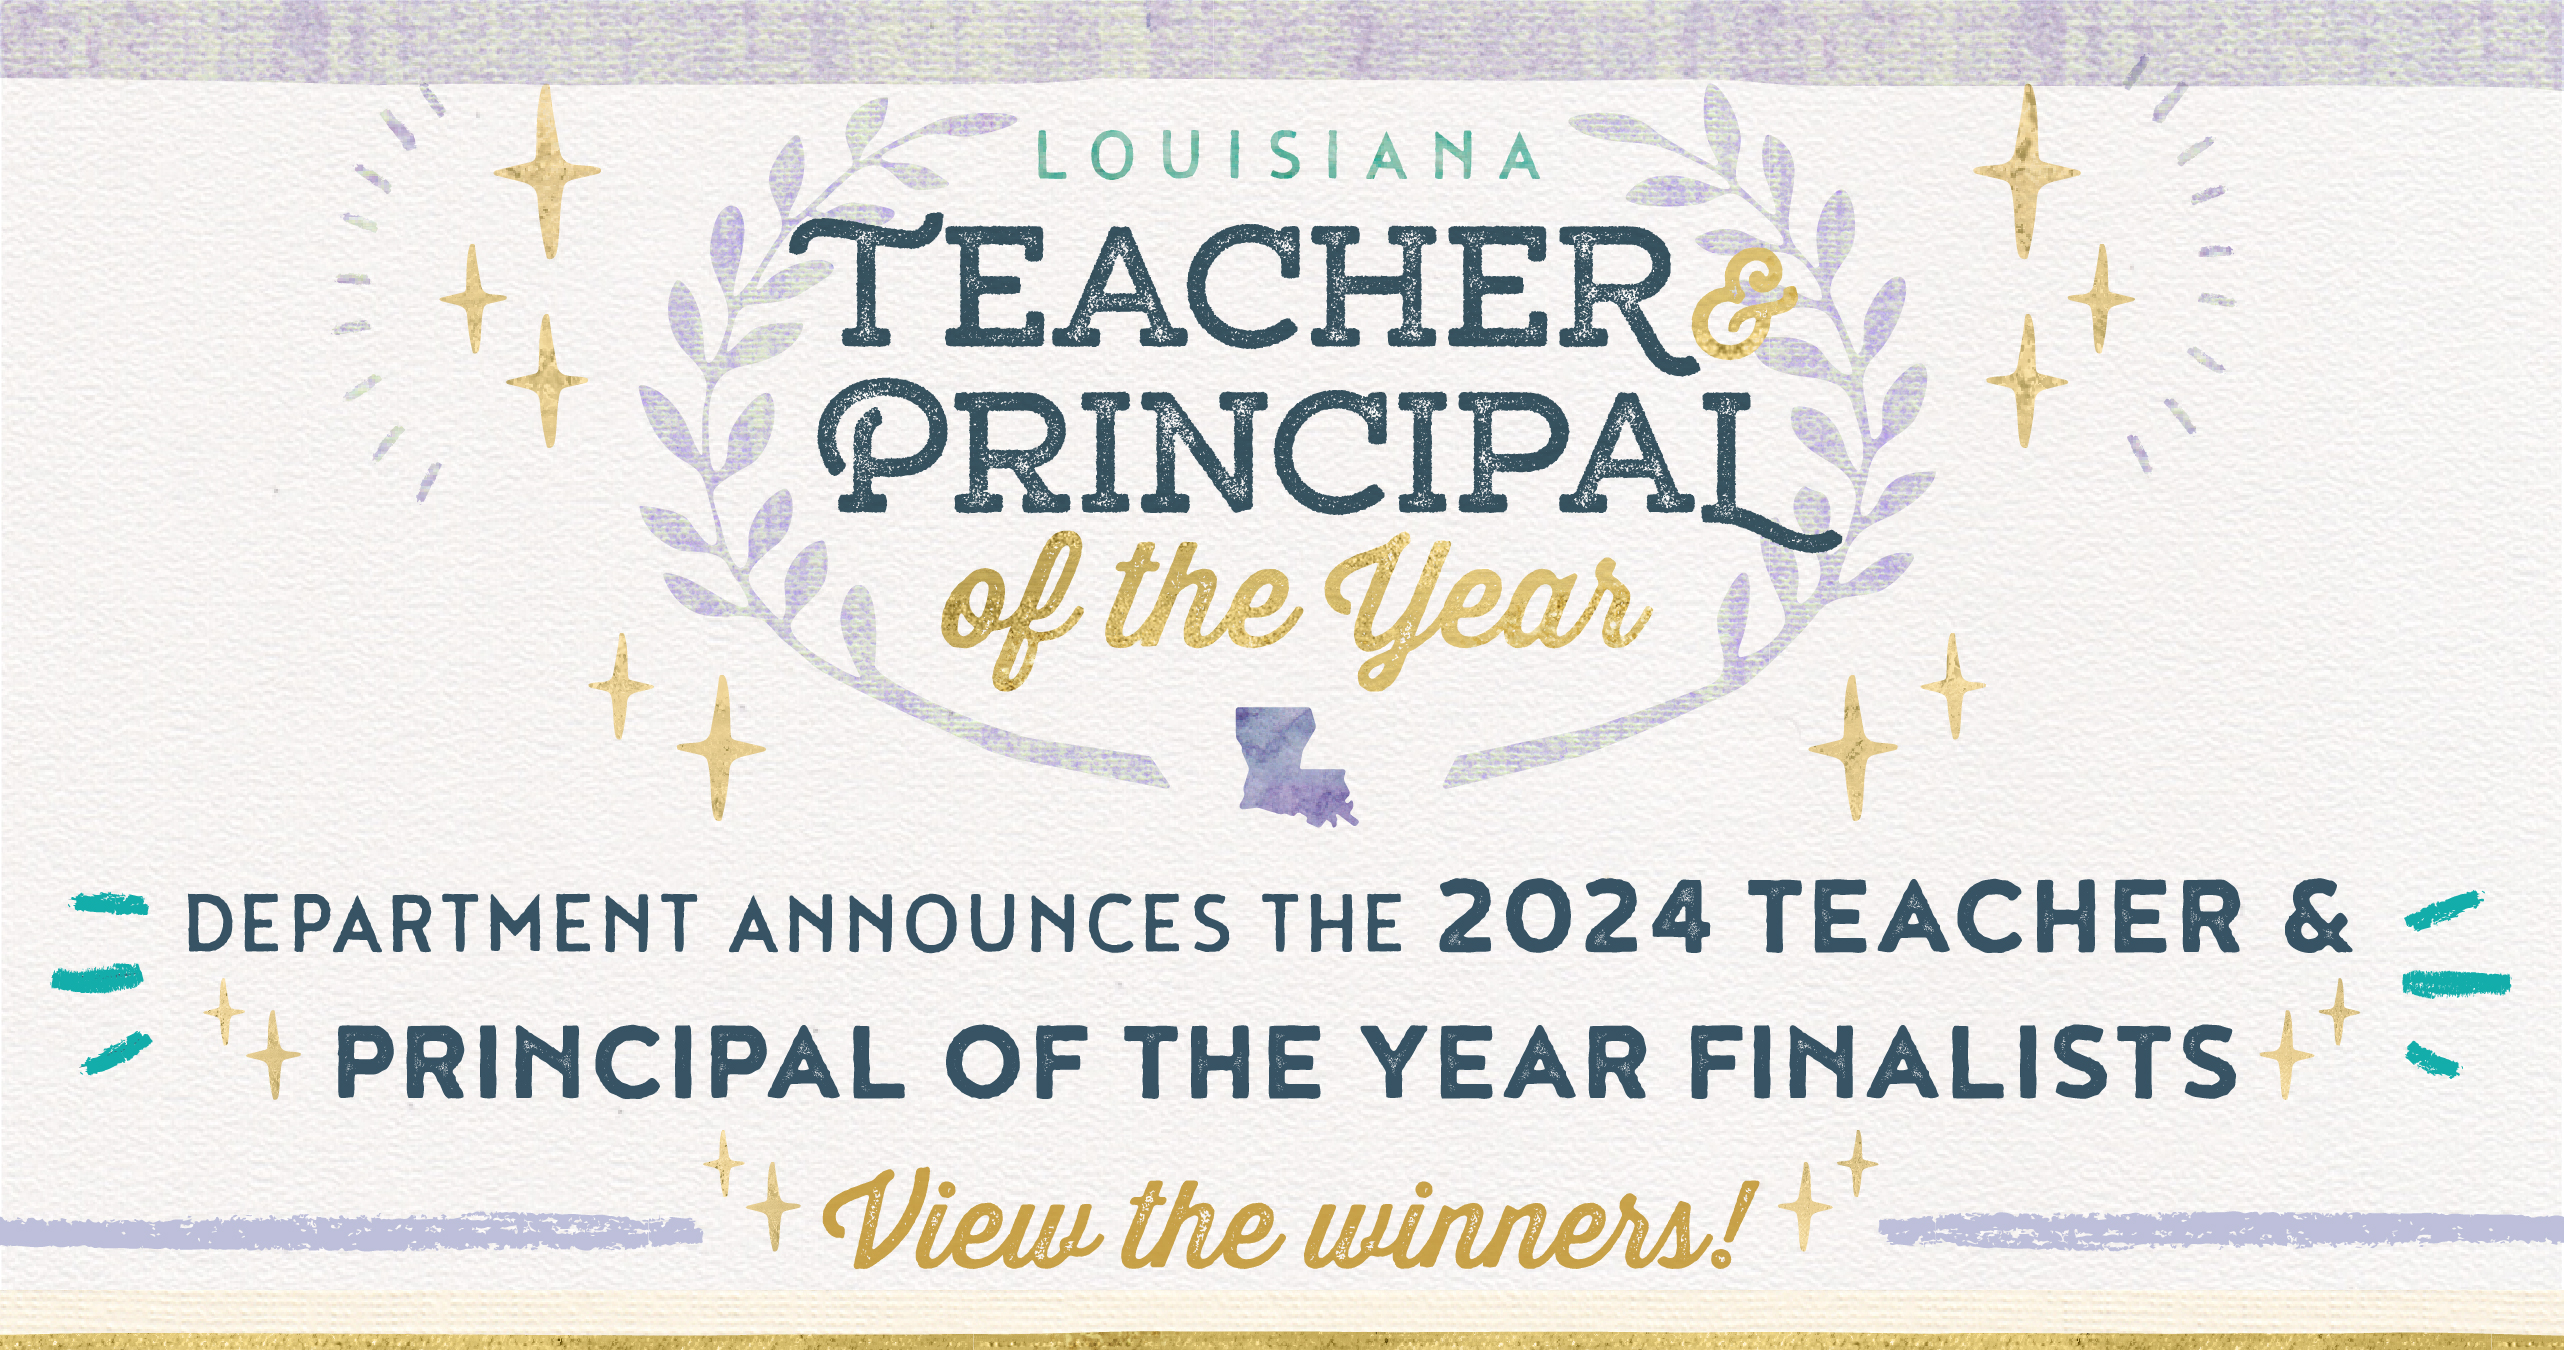 Department announces the 2024 Teacher and Principal of the Year finalists. View the winners!